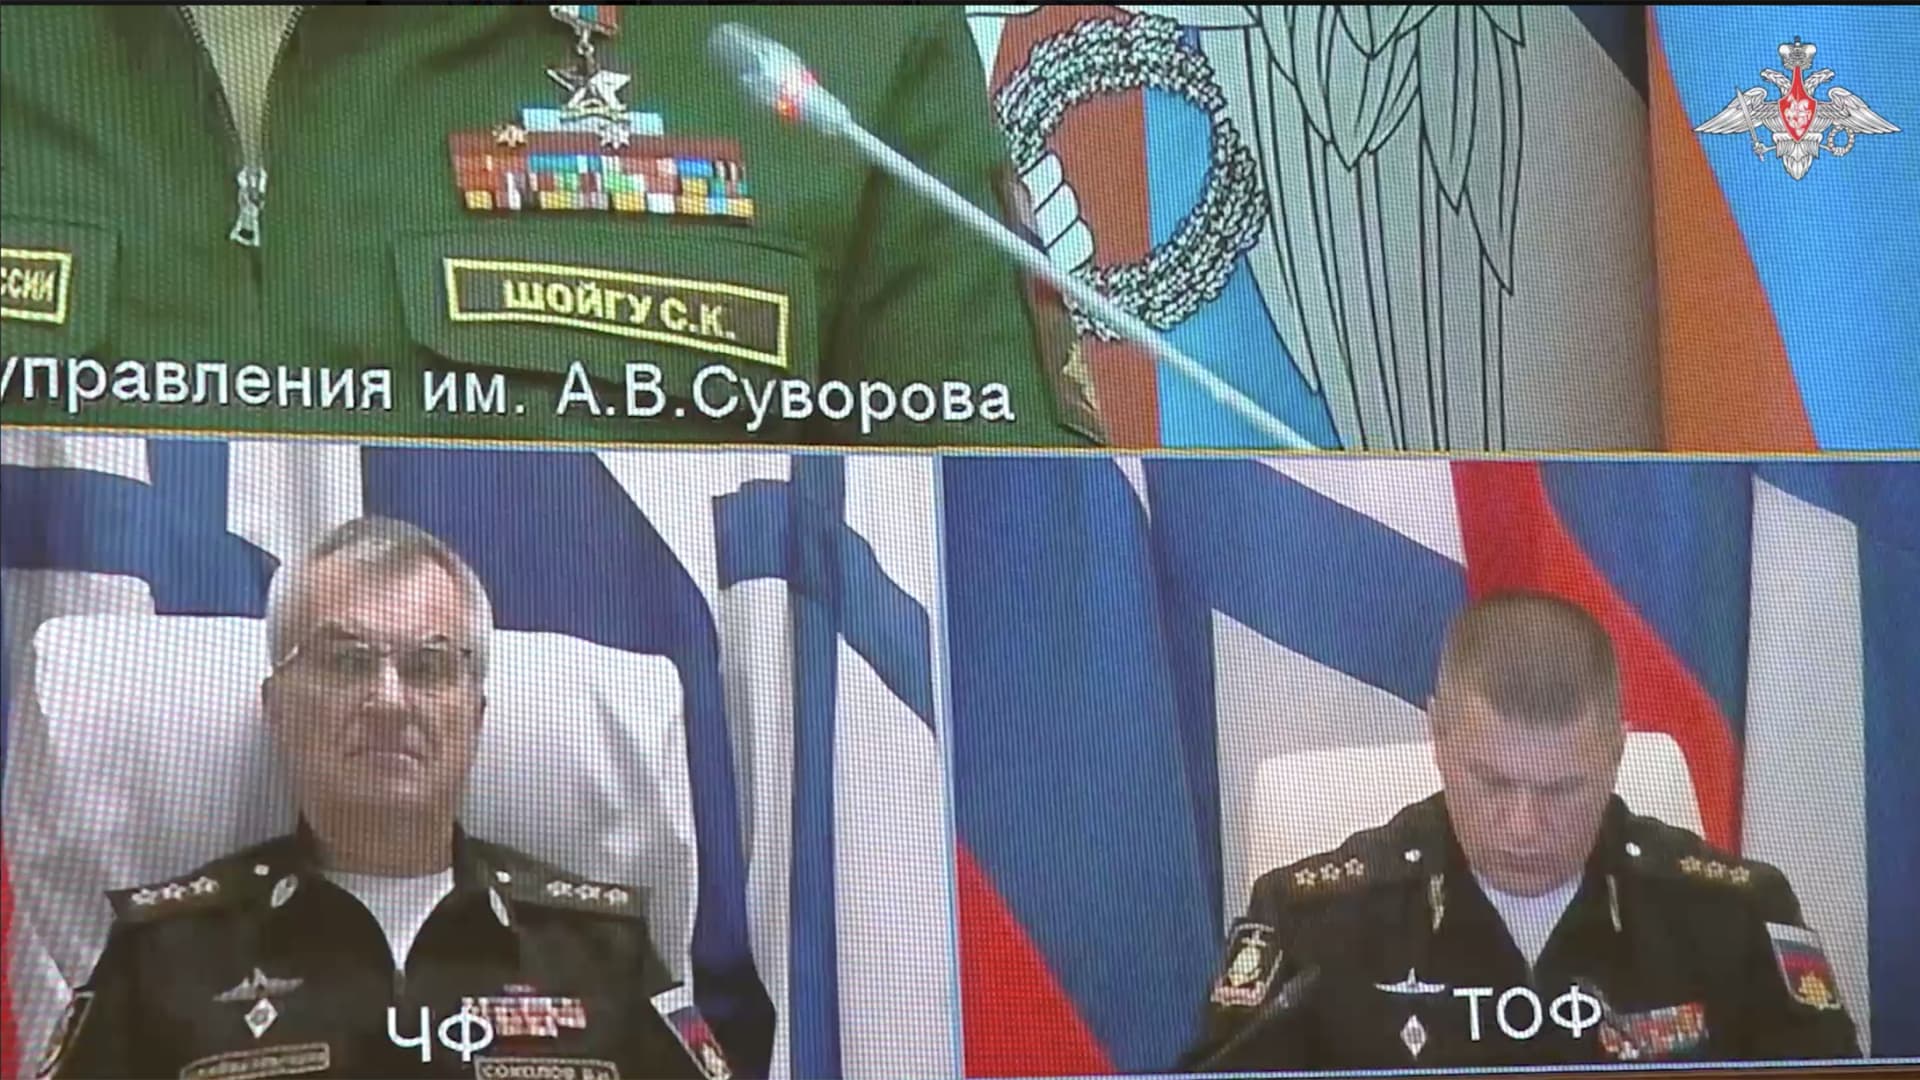 Commander of the Russian Black Sea Fleet Viktor Sokolov (left) appears on the screen at the meeting that Russian Defense Minister Sergei Shoigu held with ministry officials in Moscow, Russia, on Sept. 26, 2023.